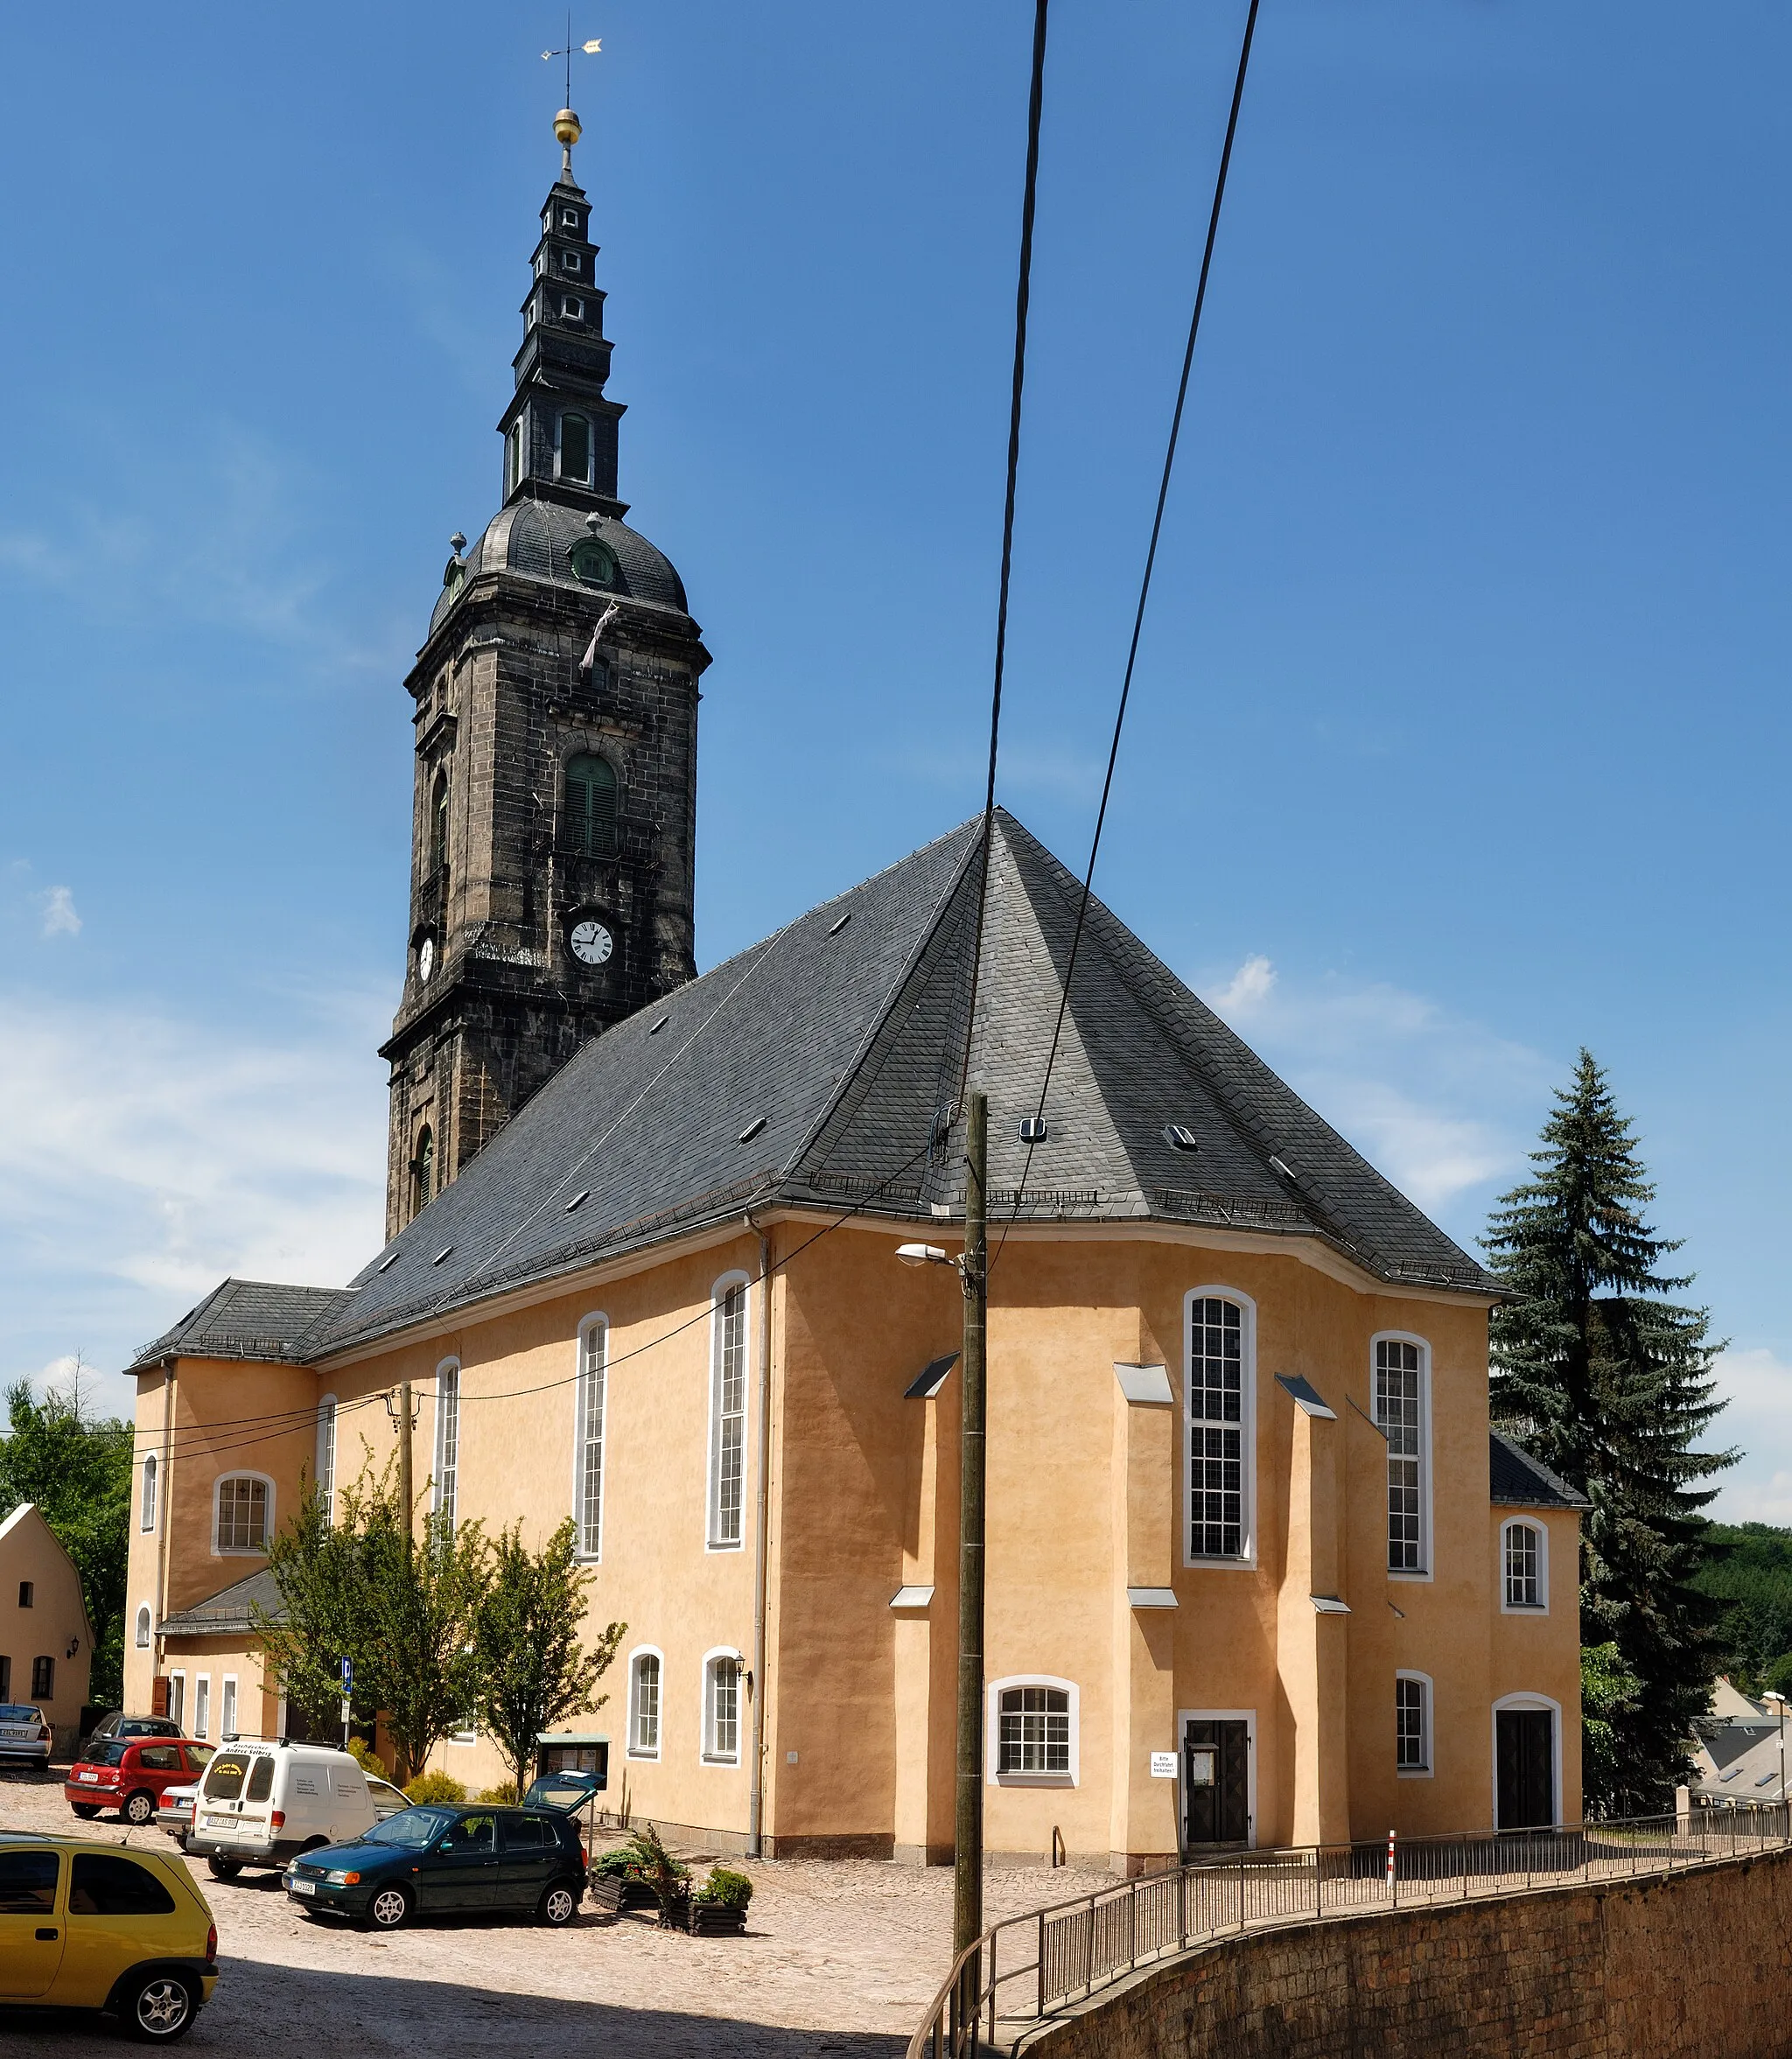 Photo showing: This image shows the St. Margarethenkirche ("Margarethen church") in Kirchberg, Saxony, Germany. It is a two segment panoramic image.